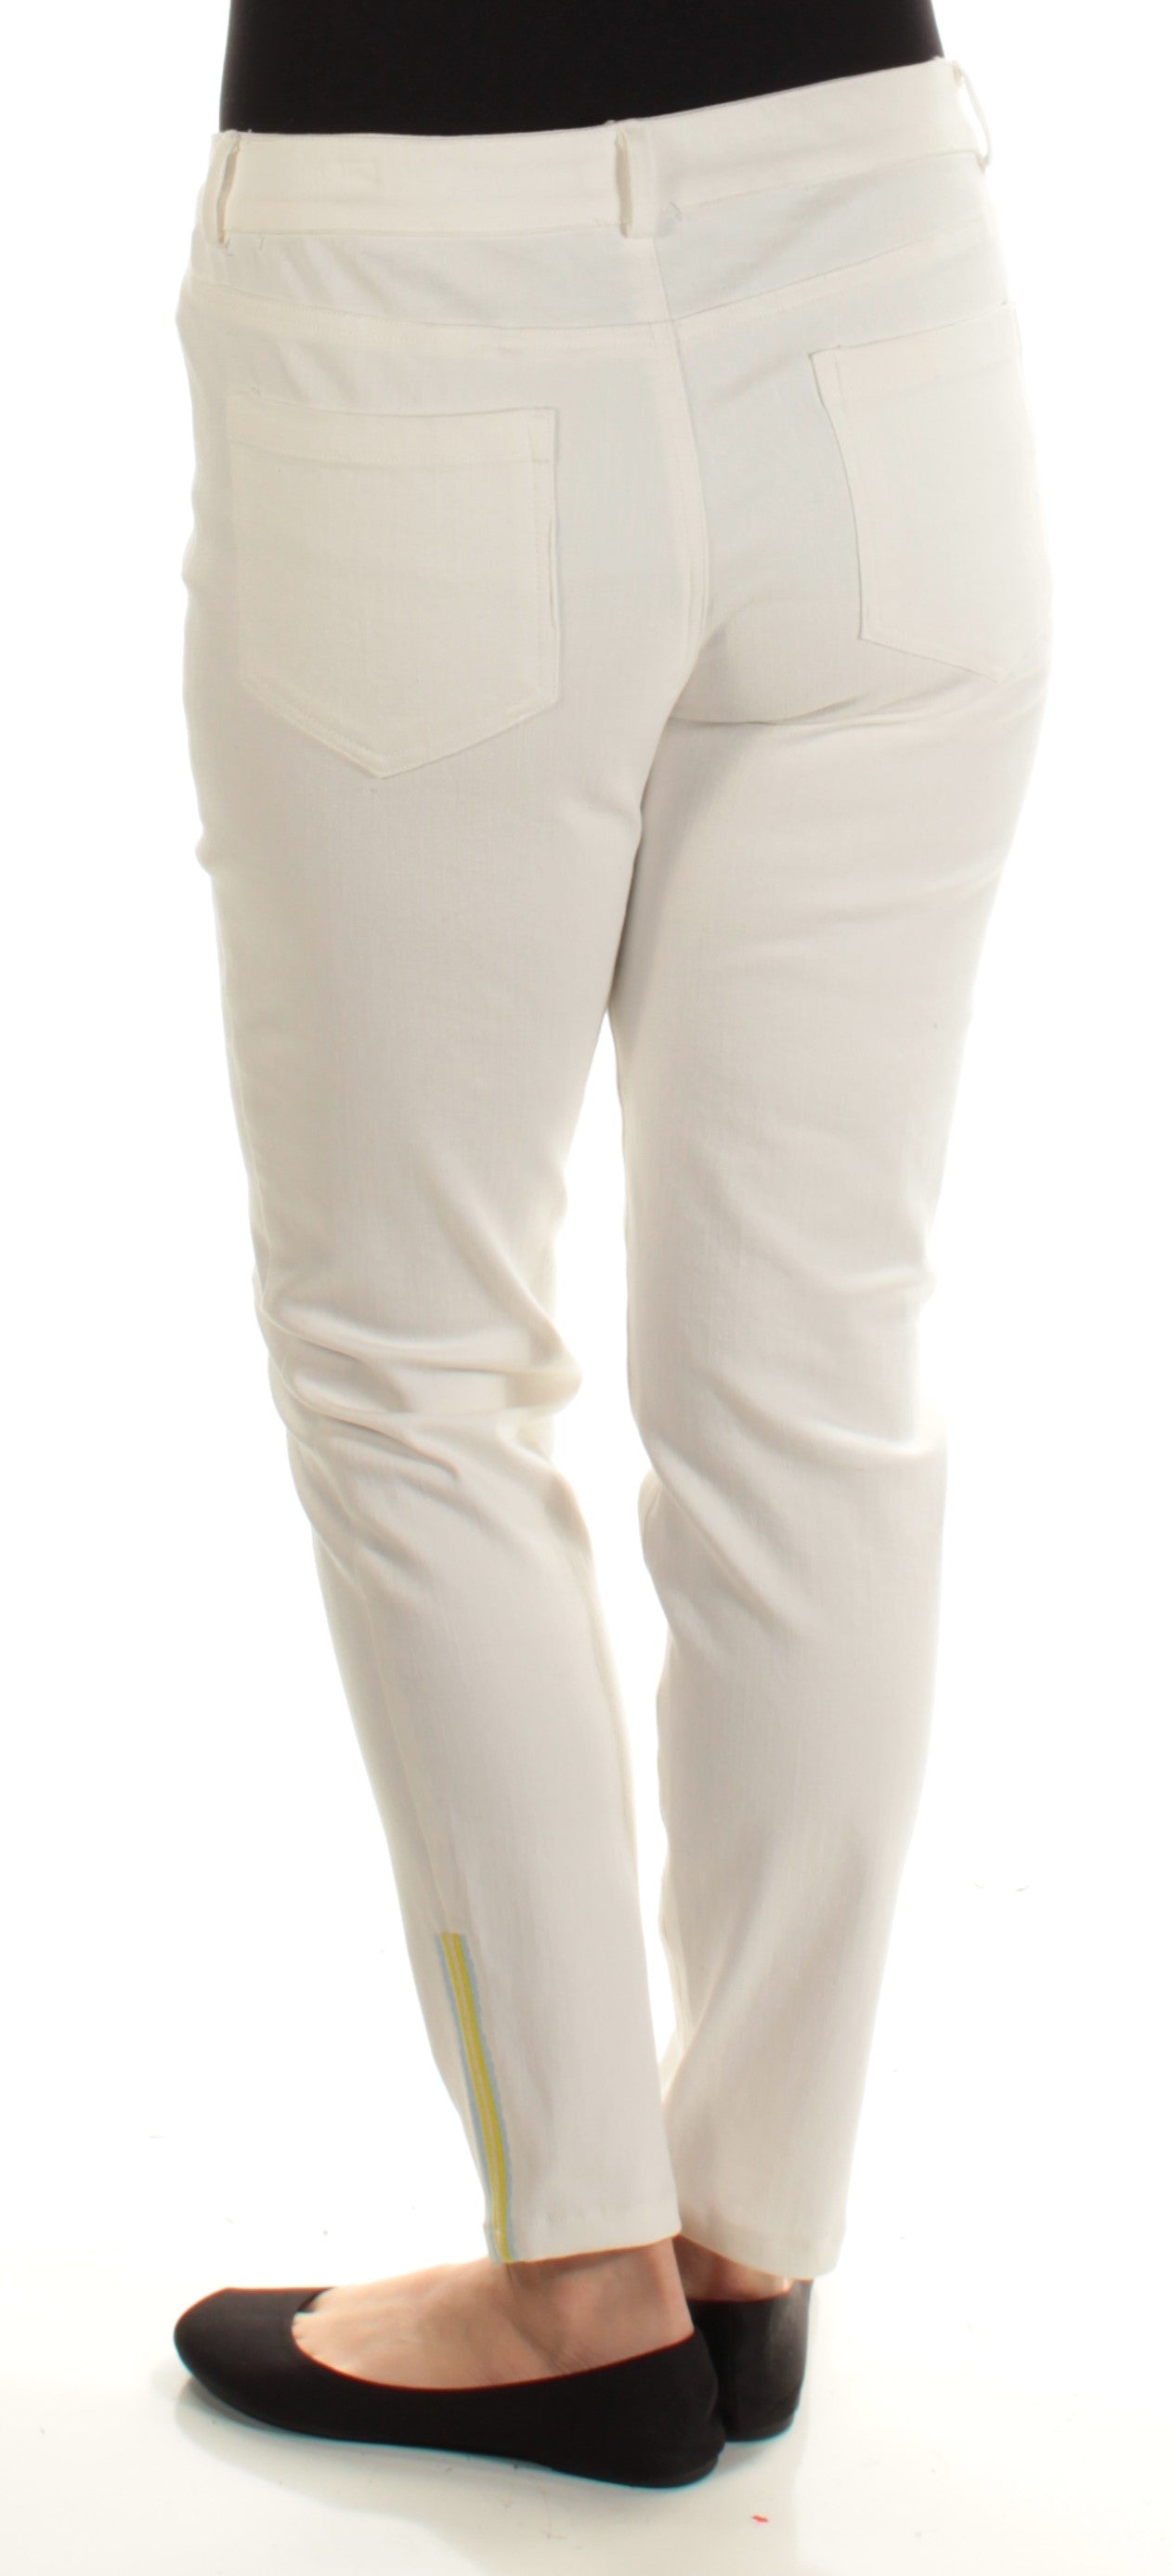 CYNTHIA ROWLEY Womens White Embroidered Jeans